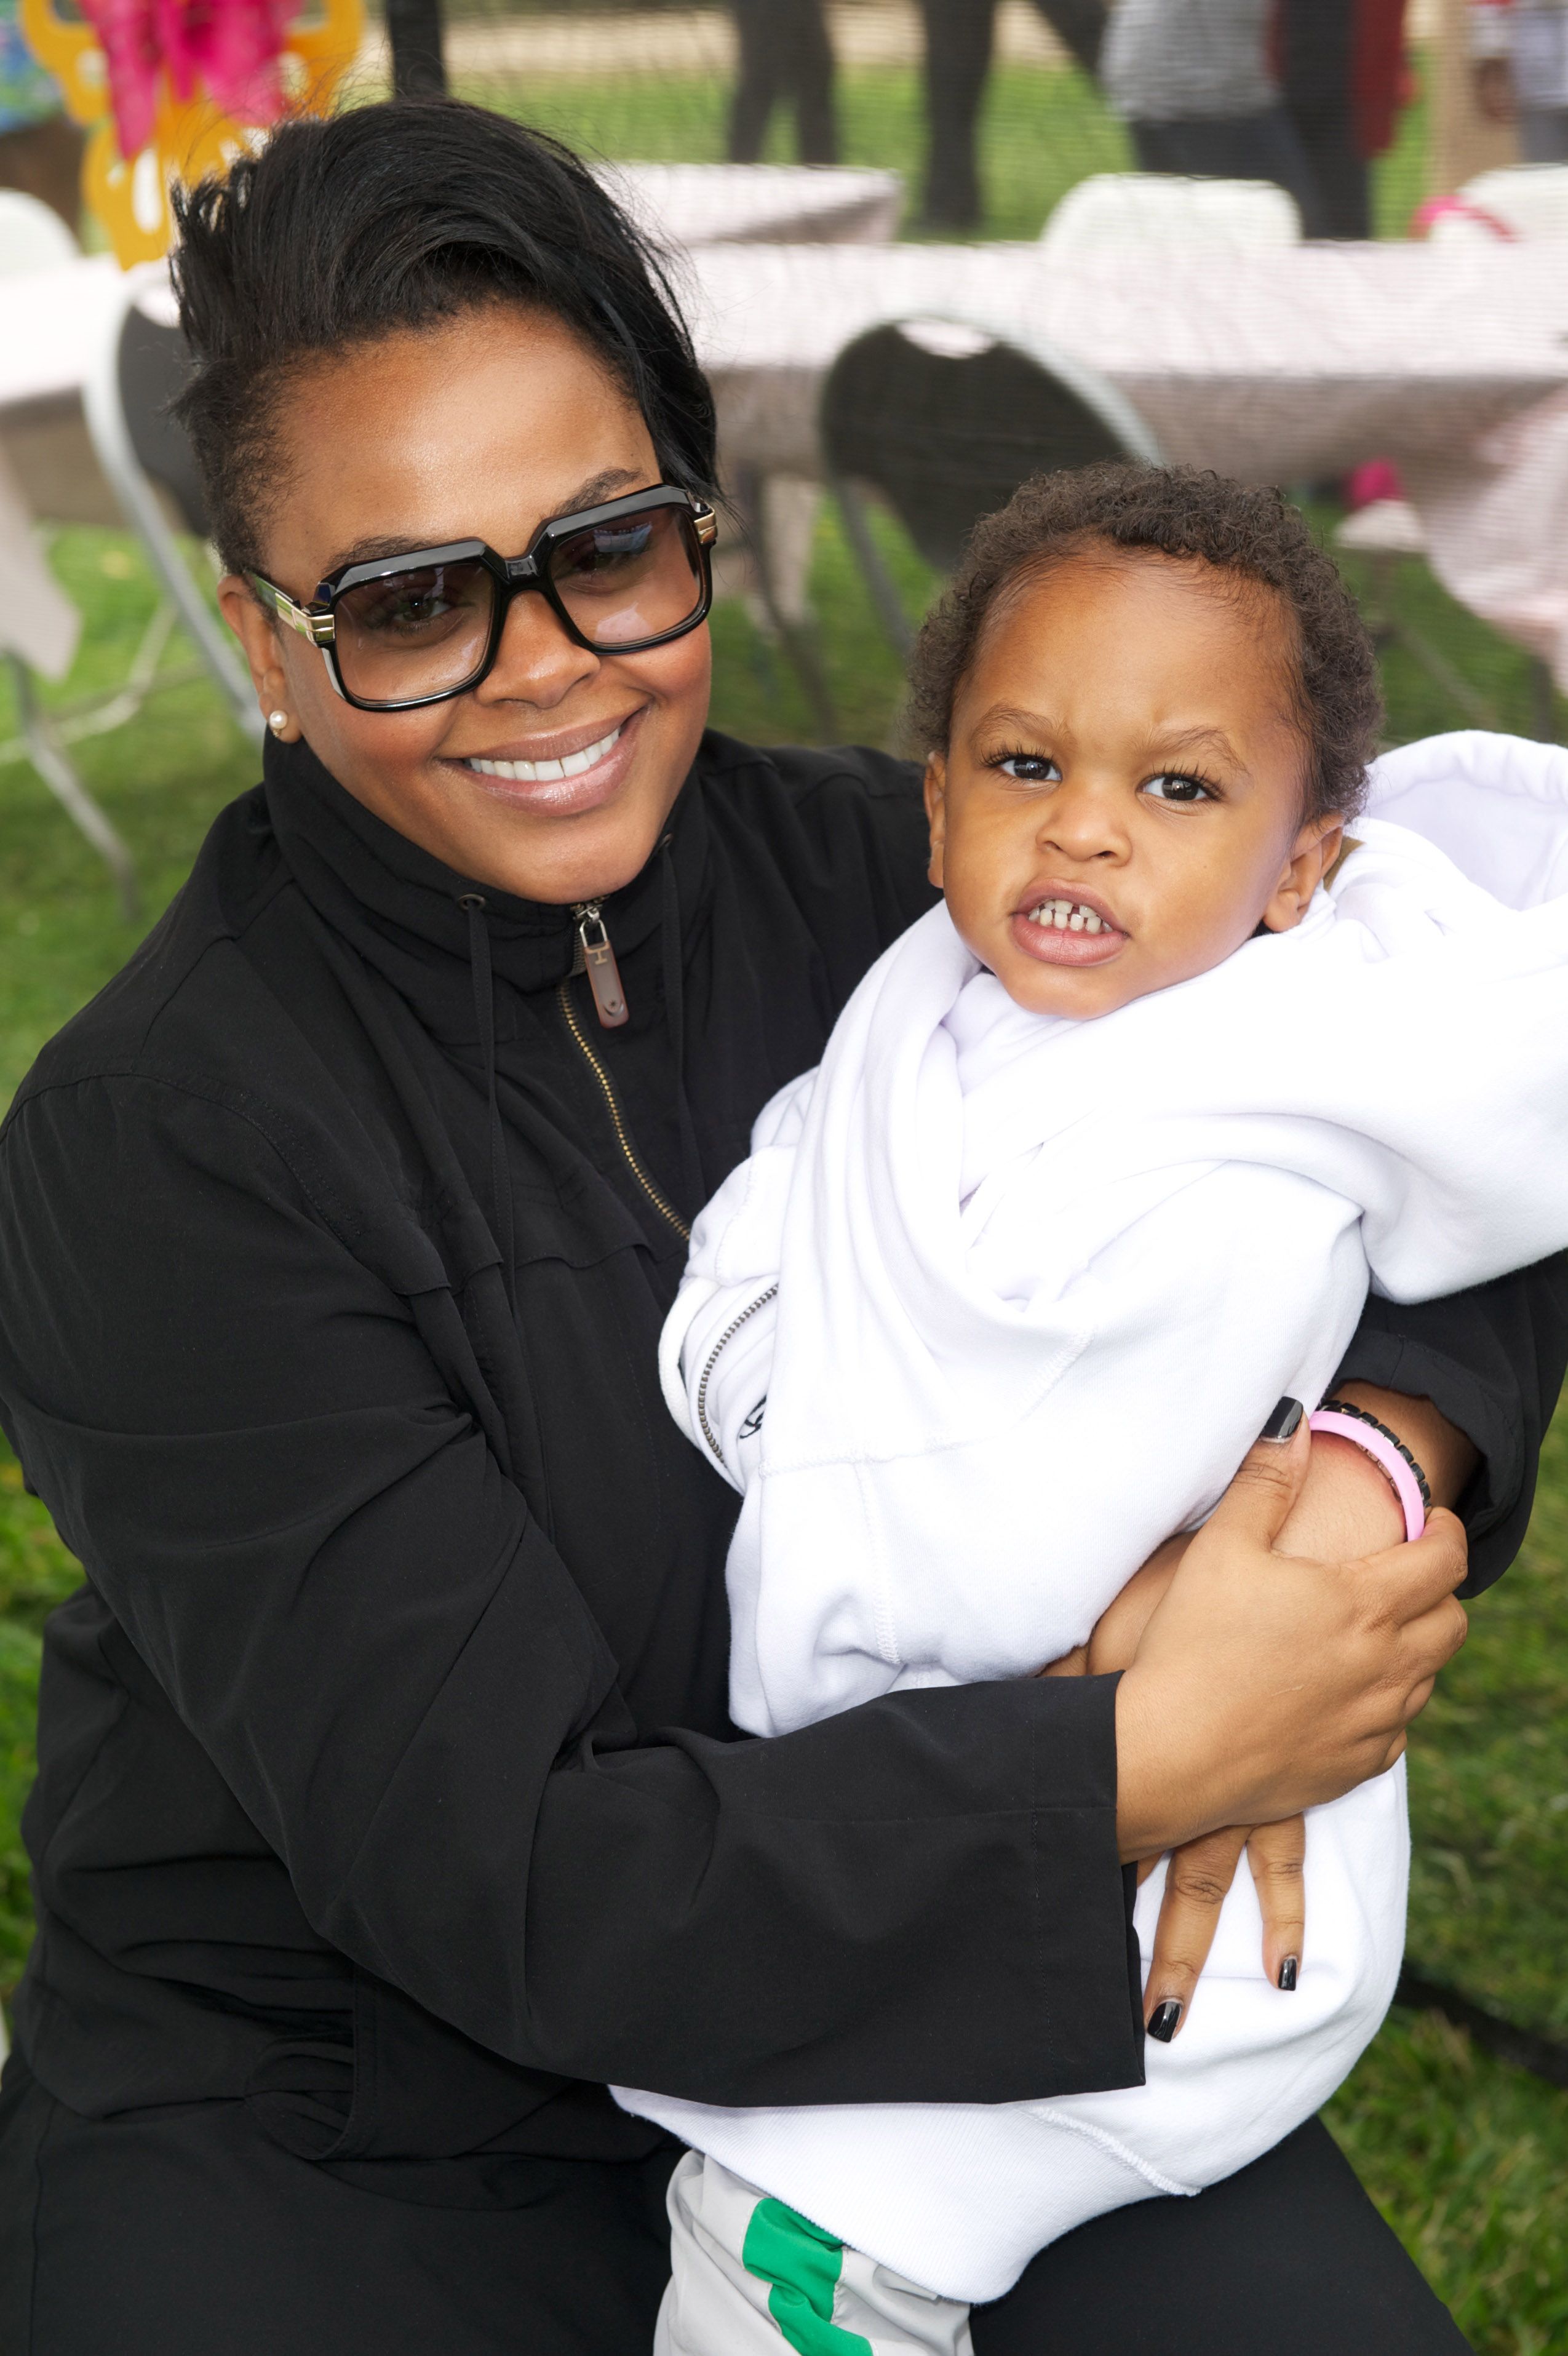 Jill Scott and her son Jett Hamilton Roberts at the 6th Annual Brittiana "Smile For Life" Run/Walk" in 2011 in Los Angeles, California | Source: Getty Images